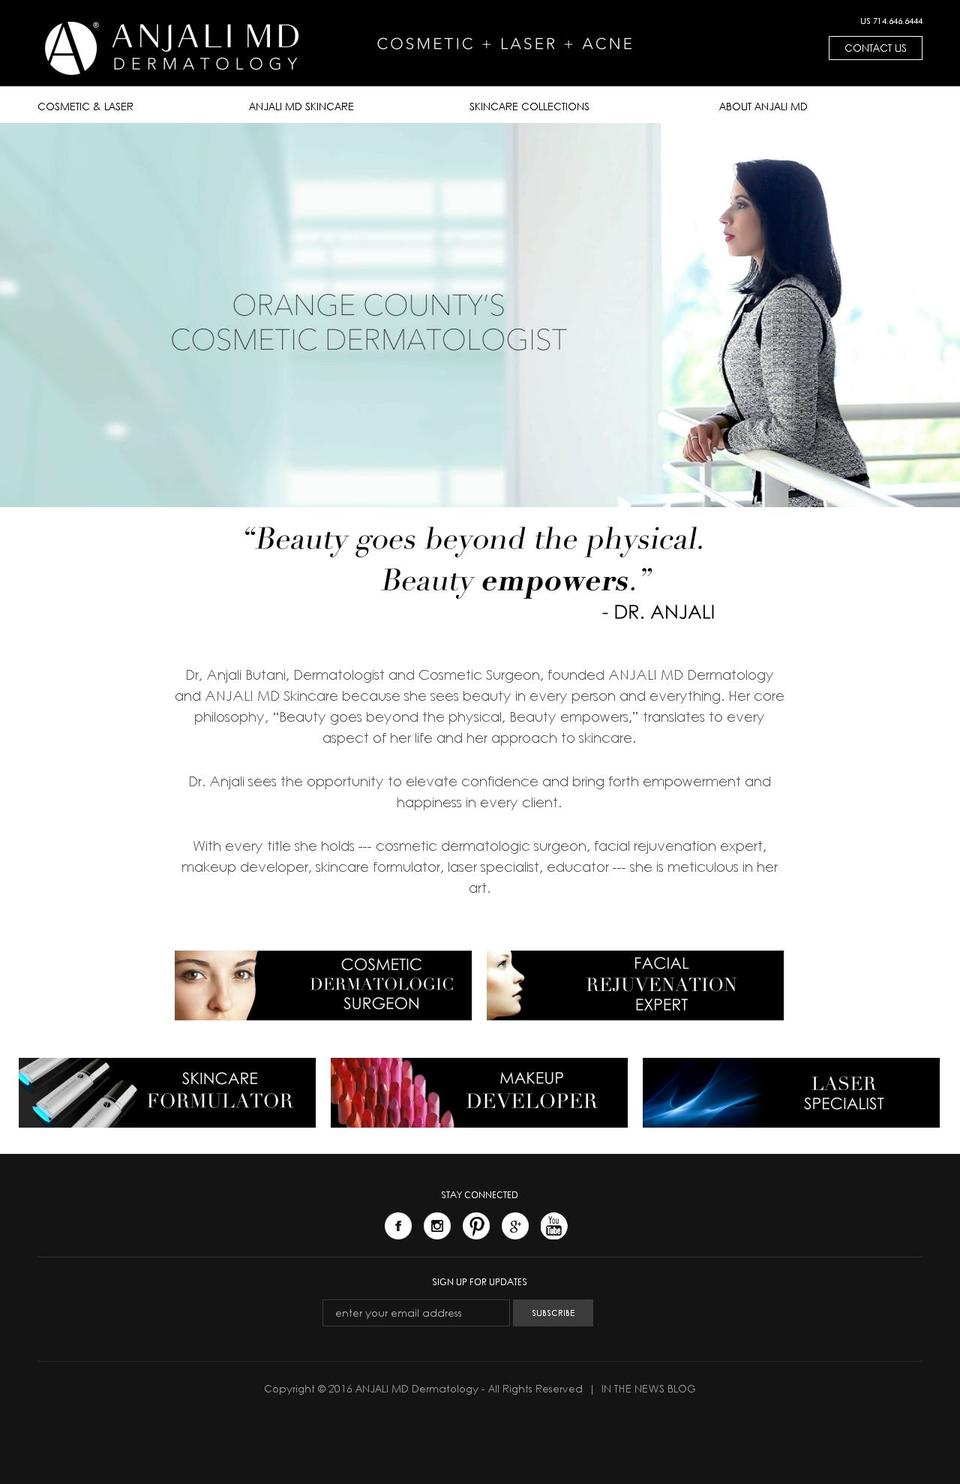 Anjali MD Site 2016 Shopify theme site example butanidermatology.org